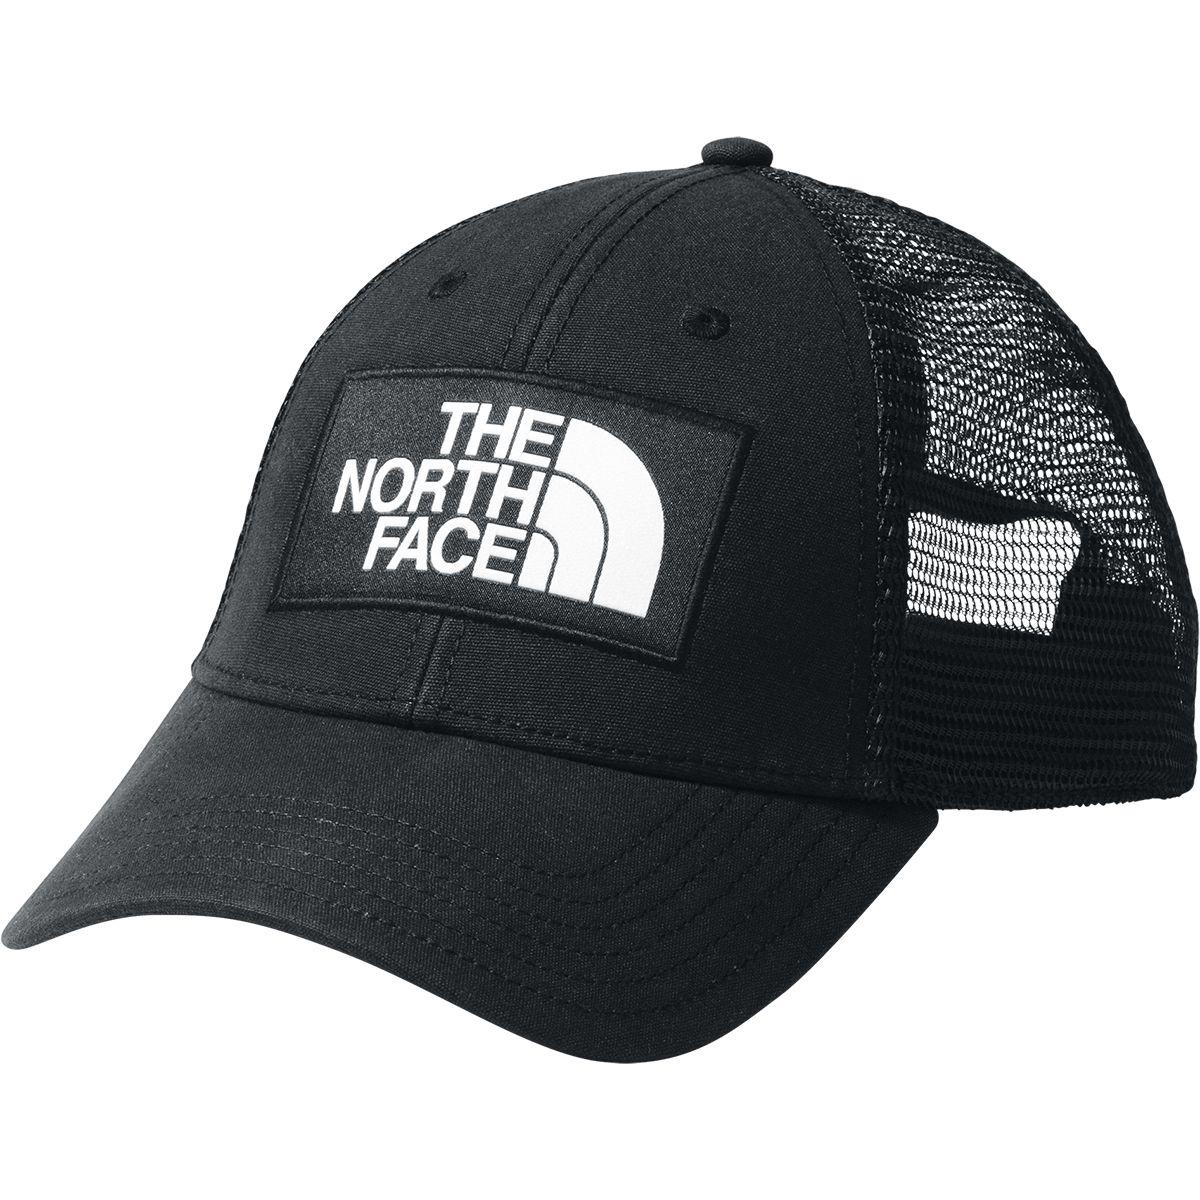 The North Face Cotton Mudder Trucker Hat in Black for Men - Lyst